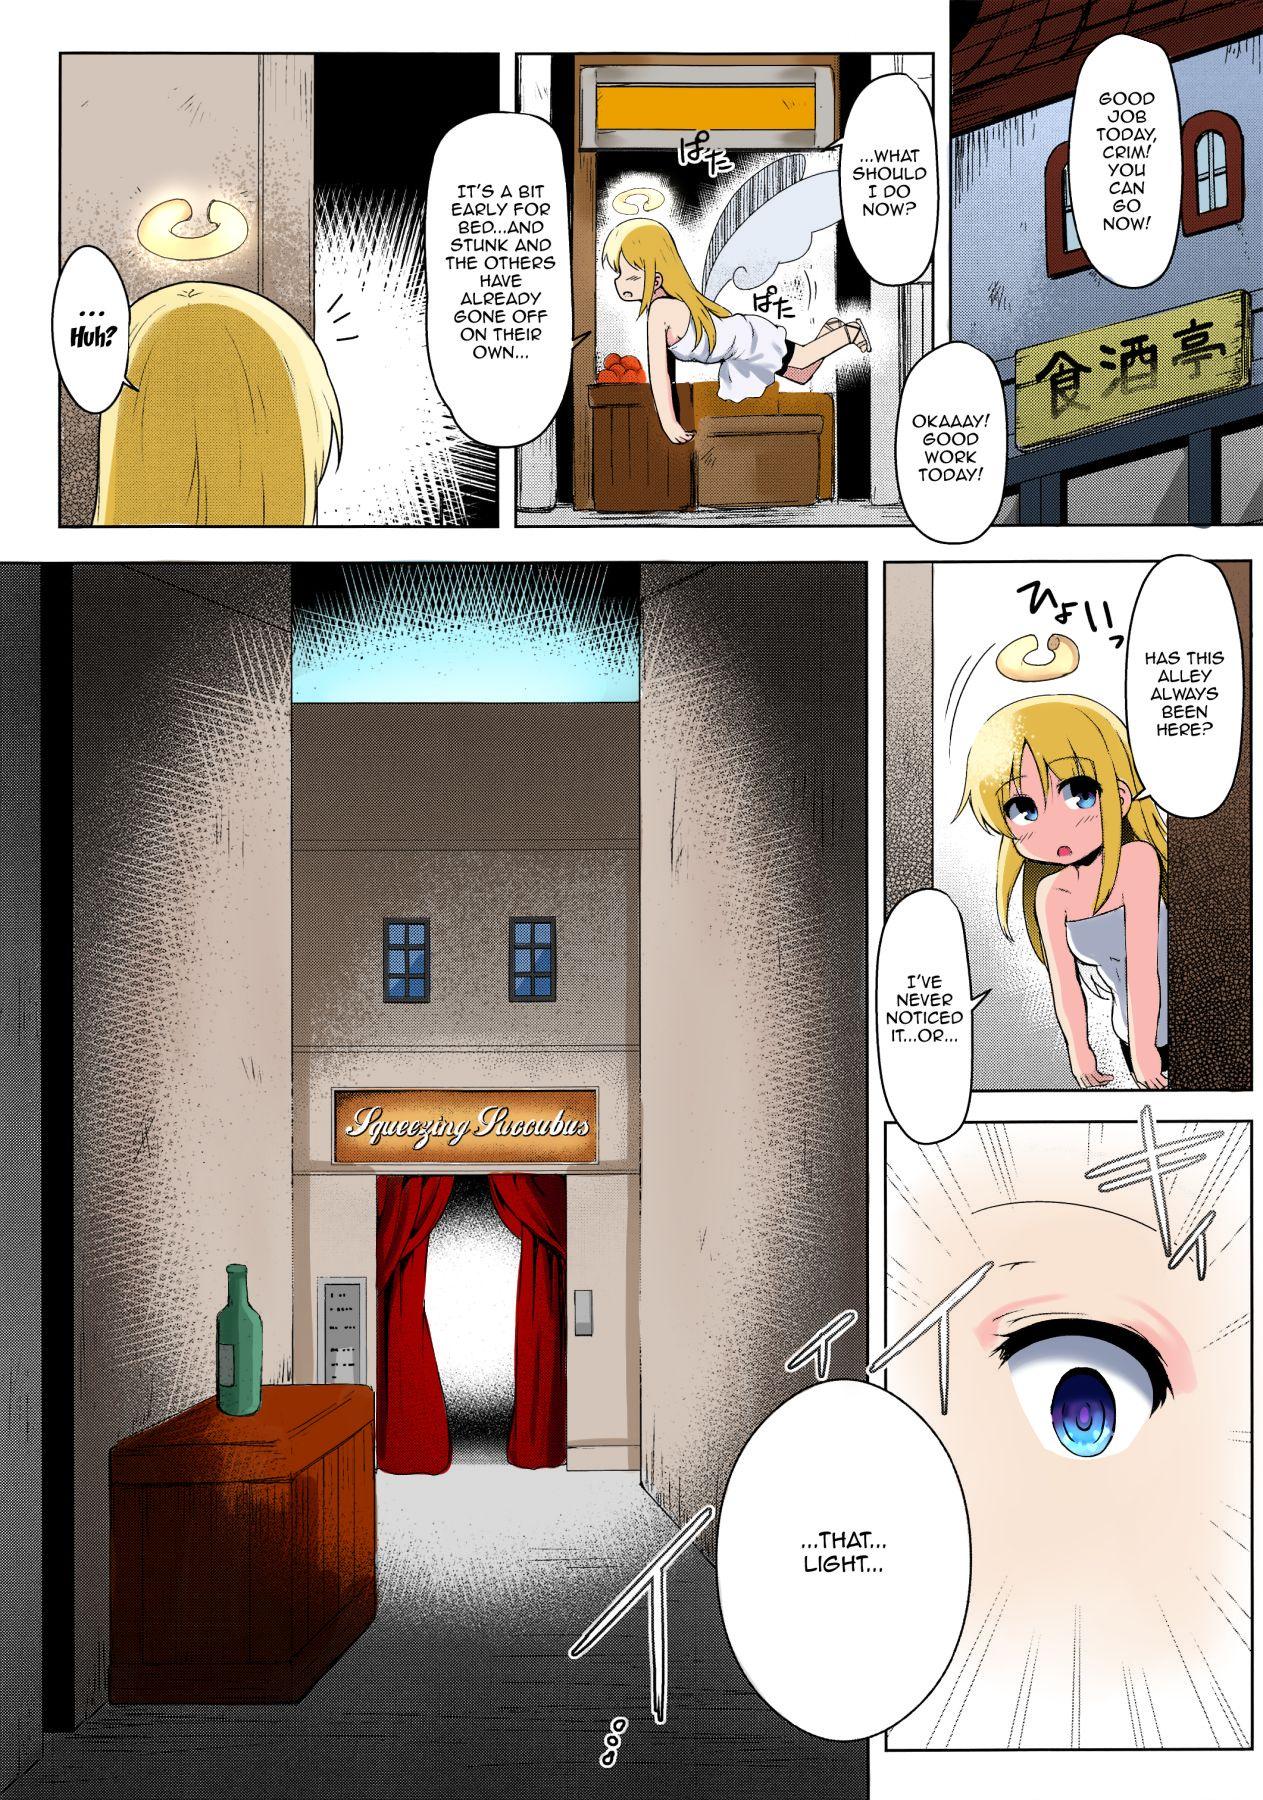 Dominicana [C.R's NEST (C.R)] Tenshi-Kun Reviewers | Angel-kun Reviewers (Ishuzoku Reviewers) [English] {Doujins.com} [Colorized] - Ishuzoku reviewers Anal Fuck - Page 2